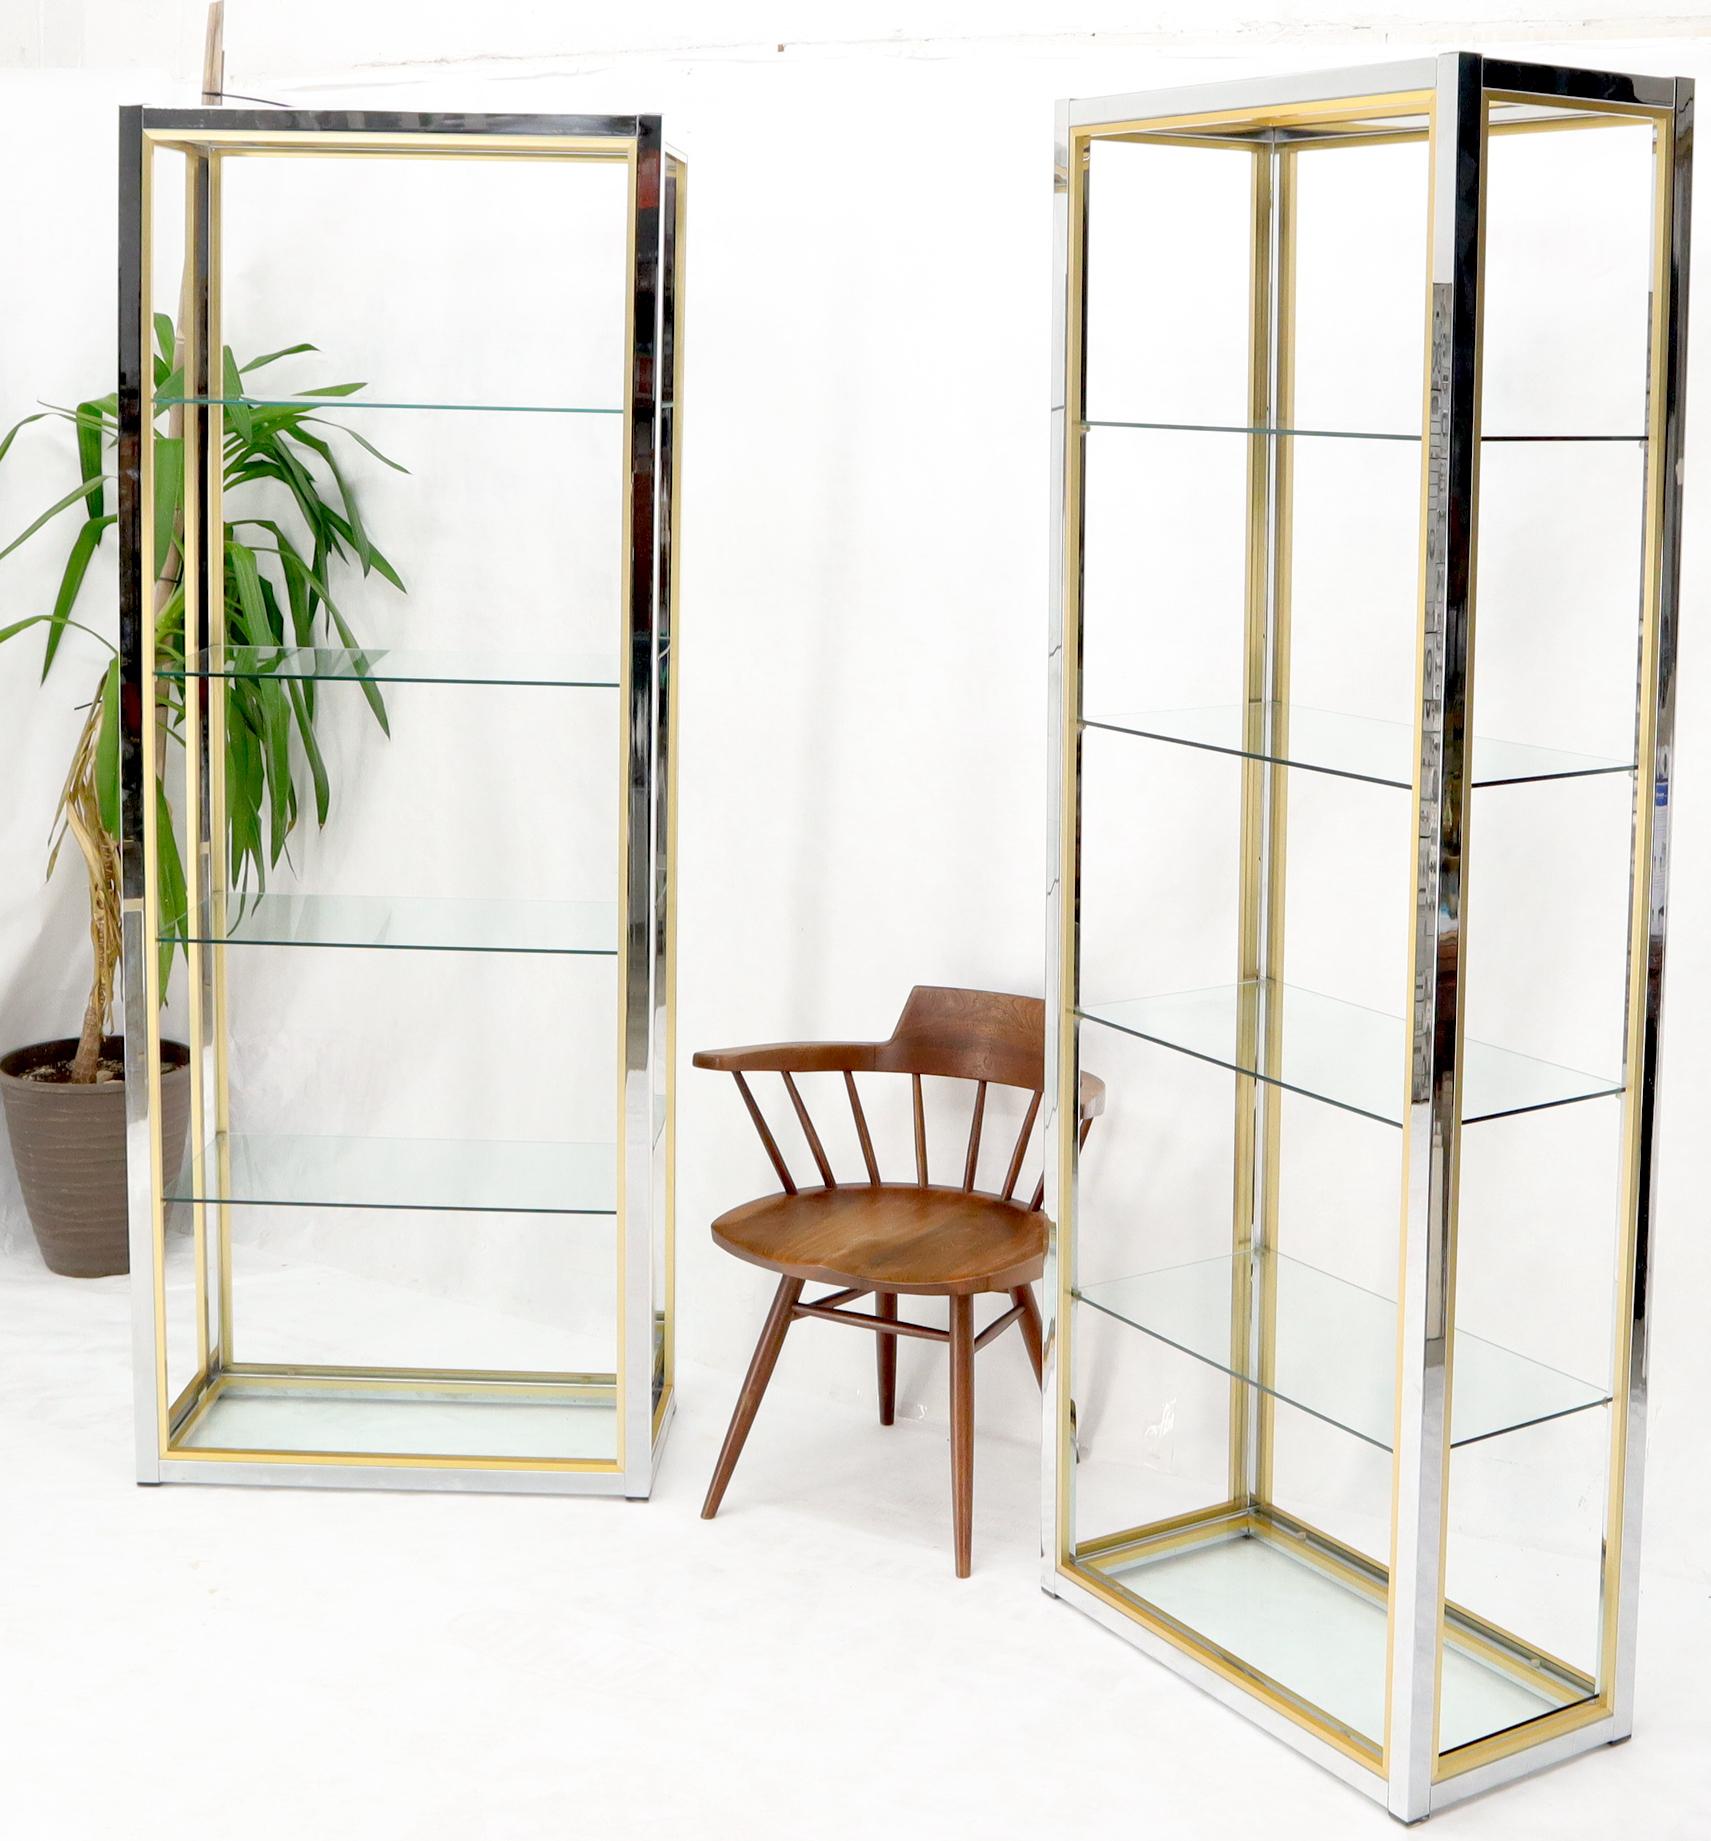 Pair of very sharp looking high quality craftsmanship étagères with glass shelves in style of Romea Riga.